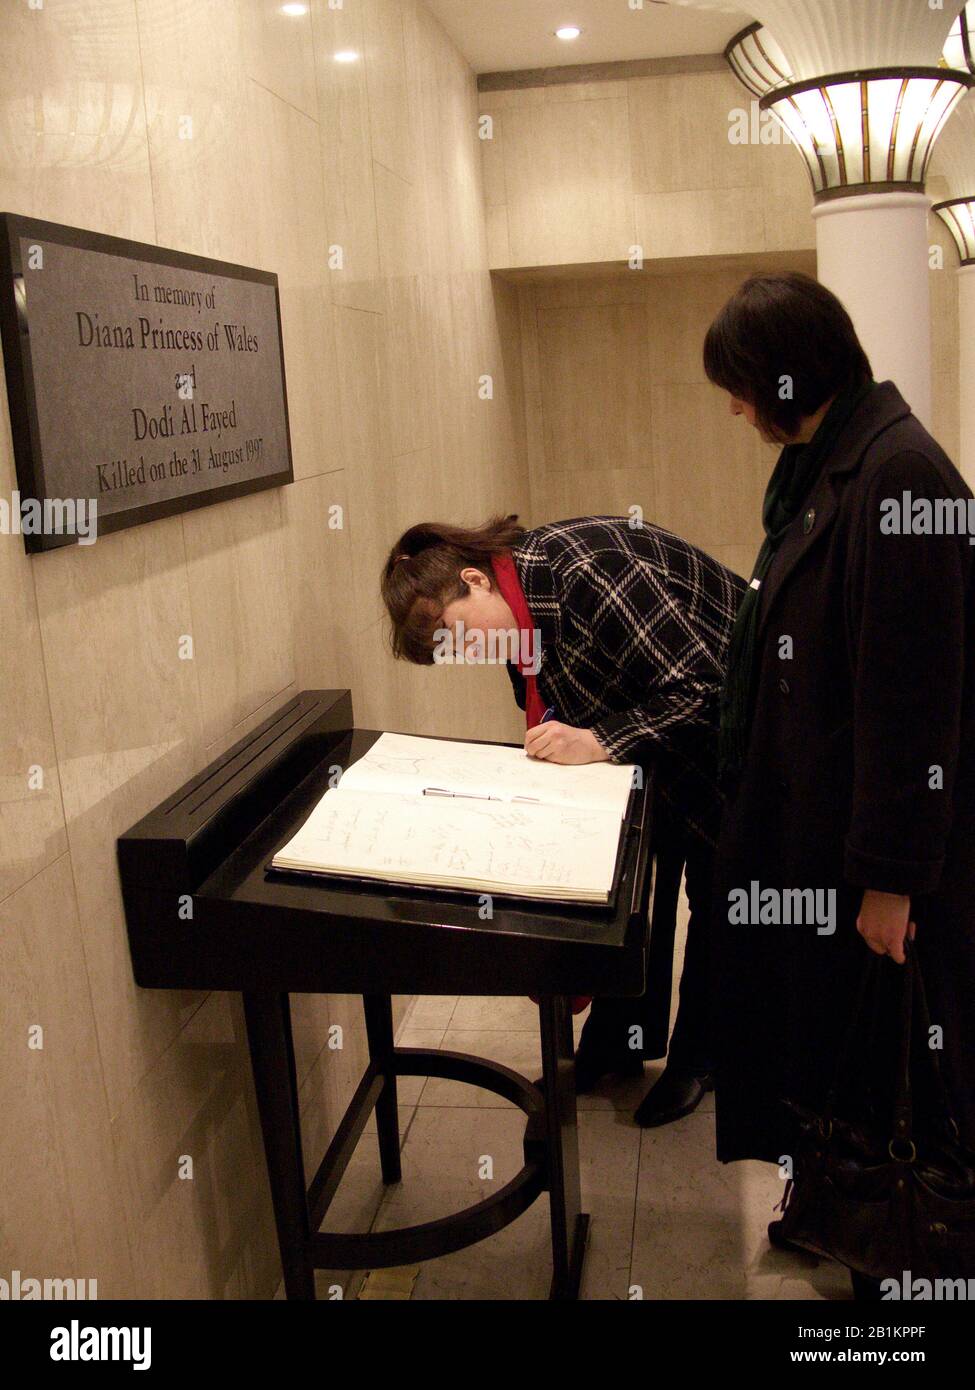 Book of remembrance for Dodi Fayed and Princess Diana in Harrods department store, London, England. Stock Photo